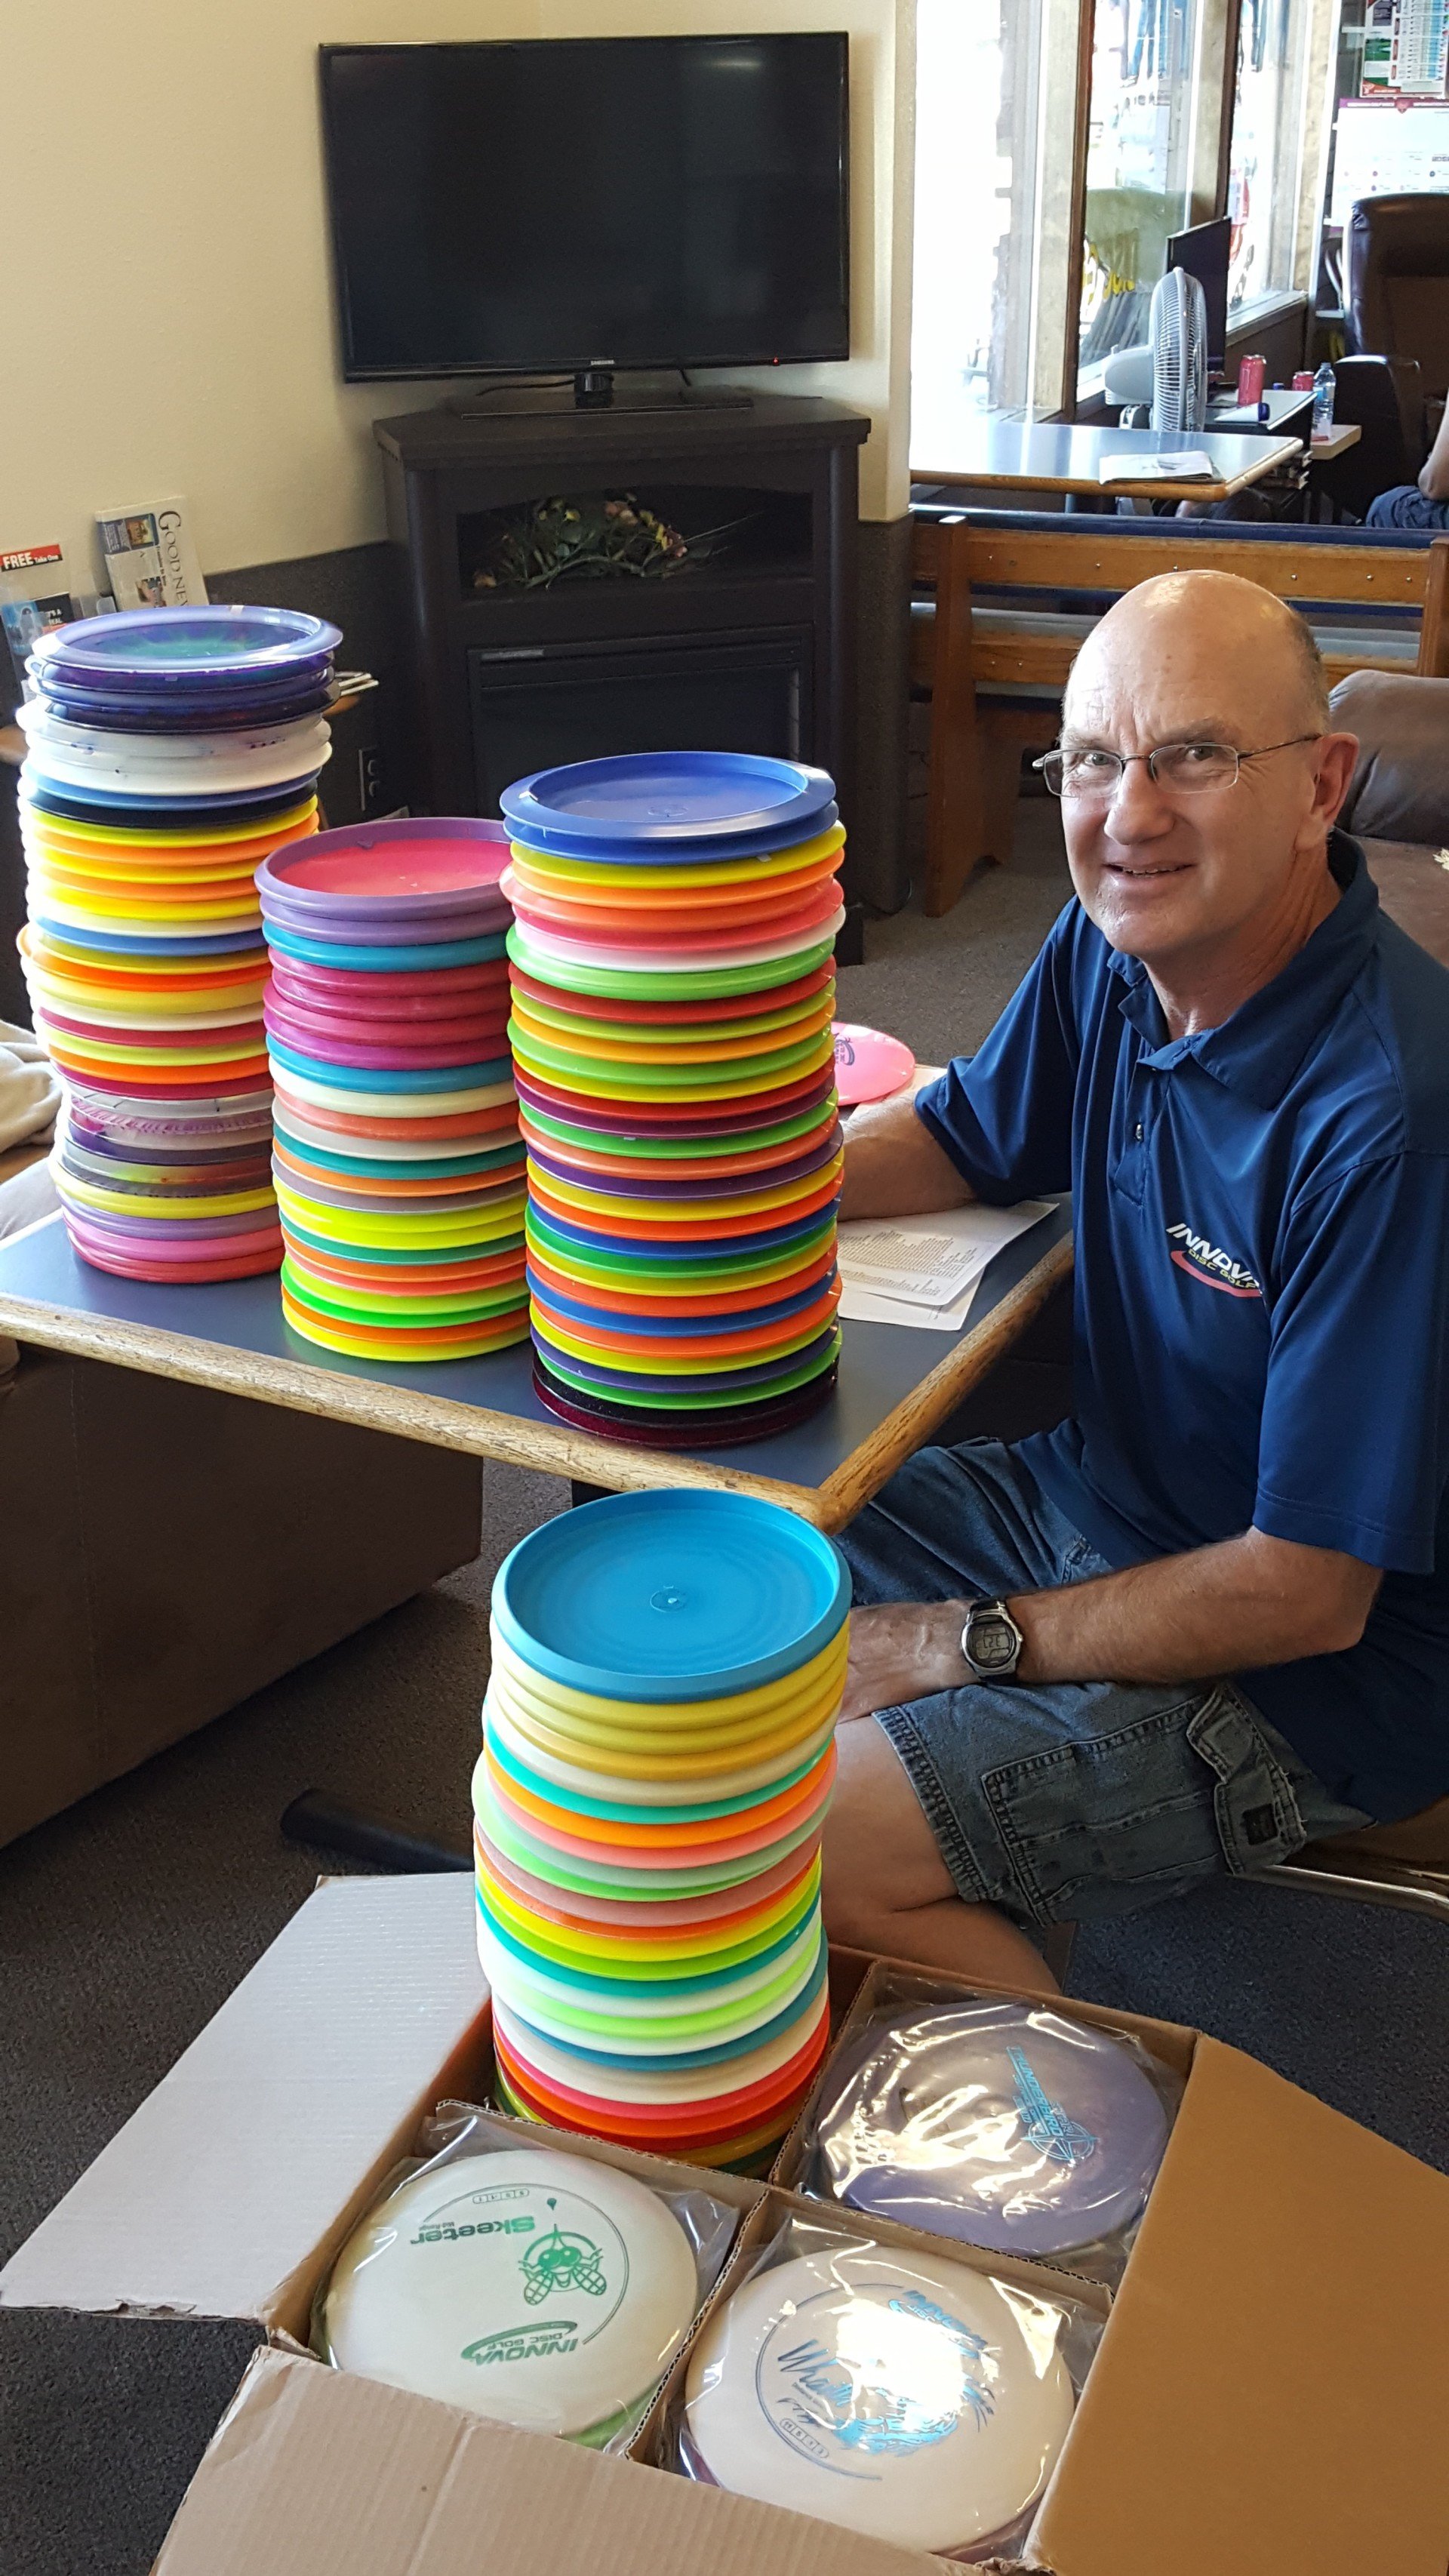 Jack with a stack of discs